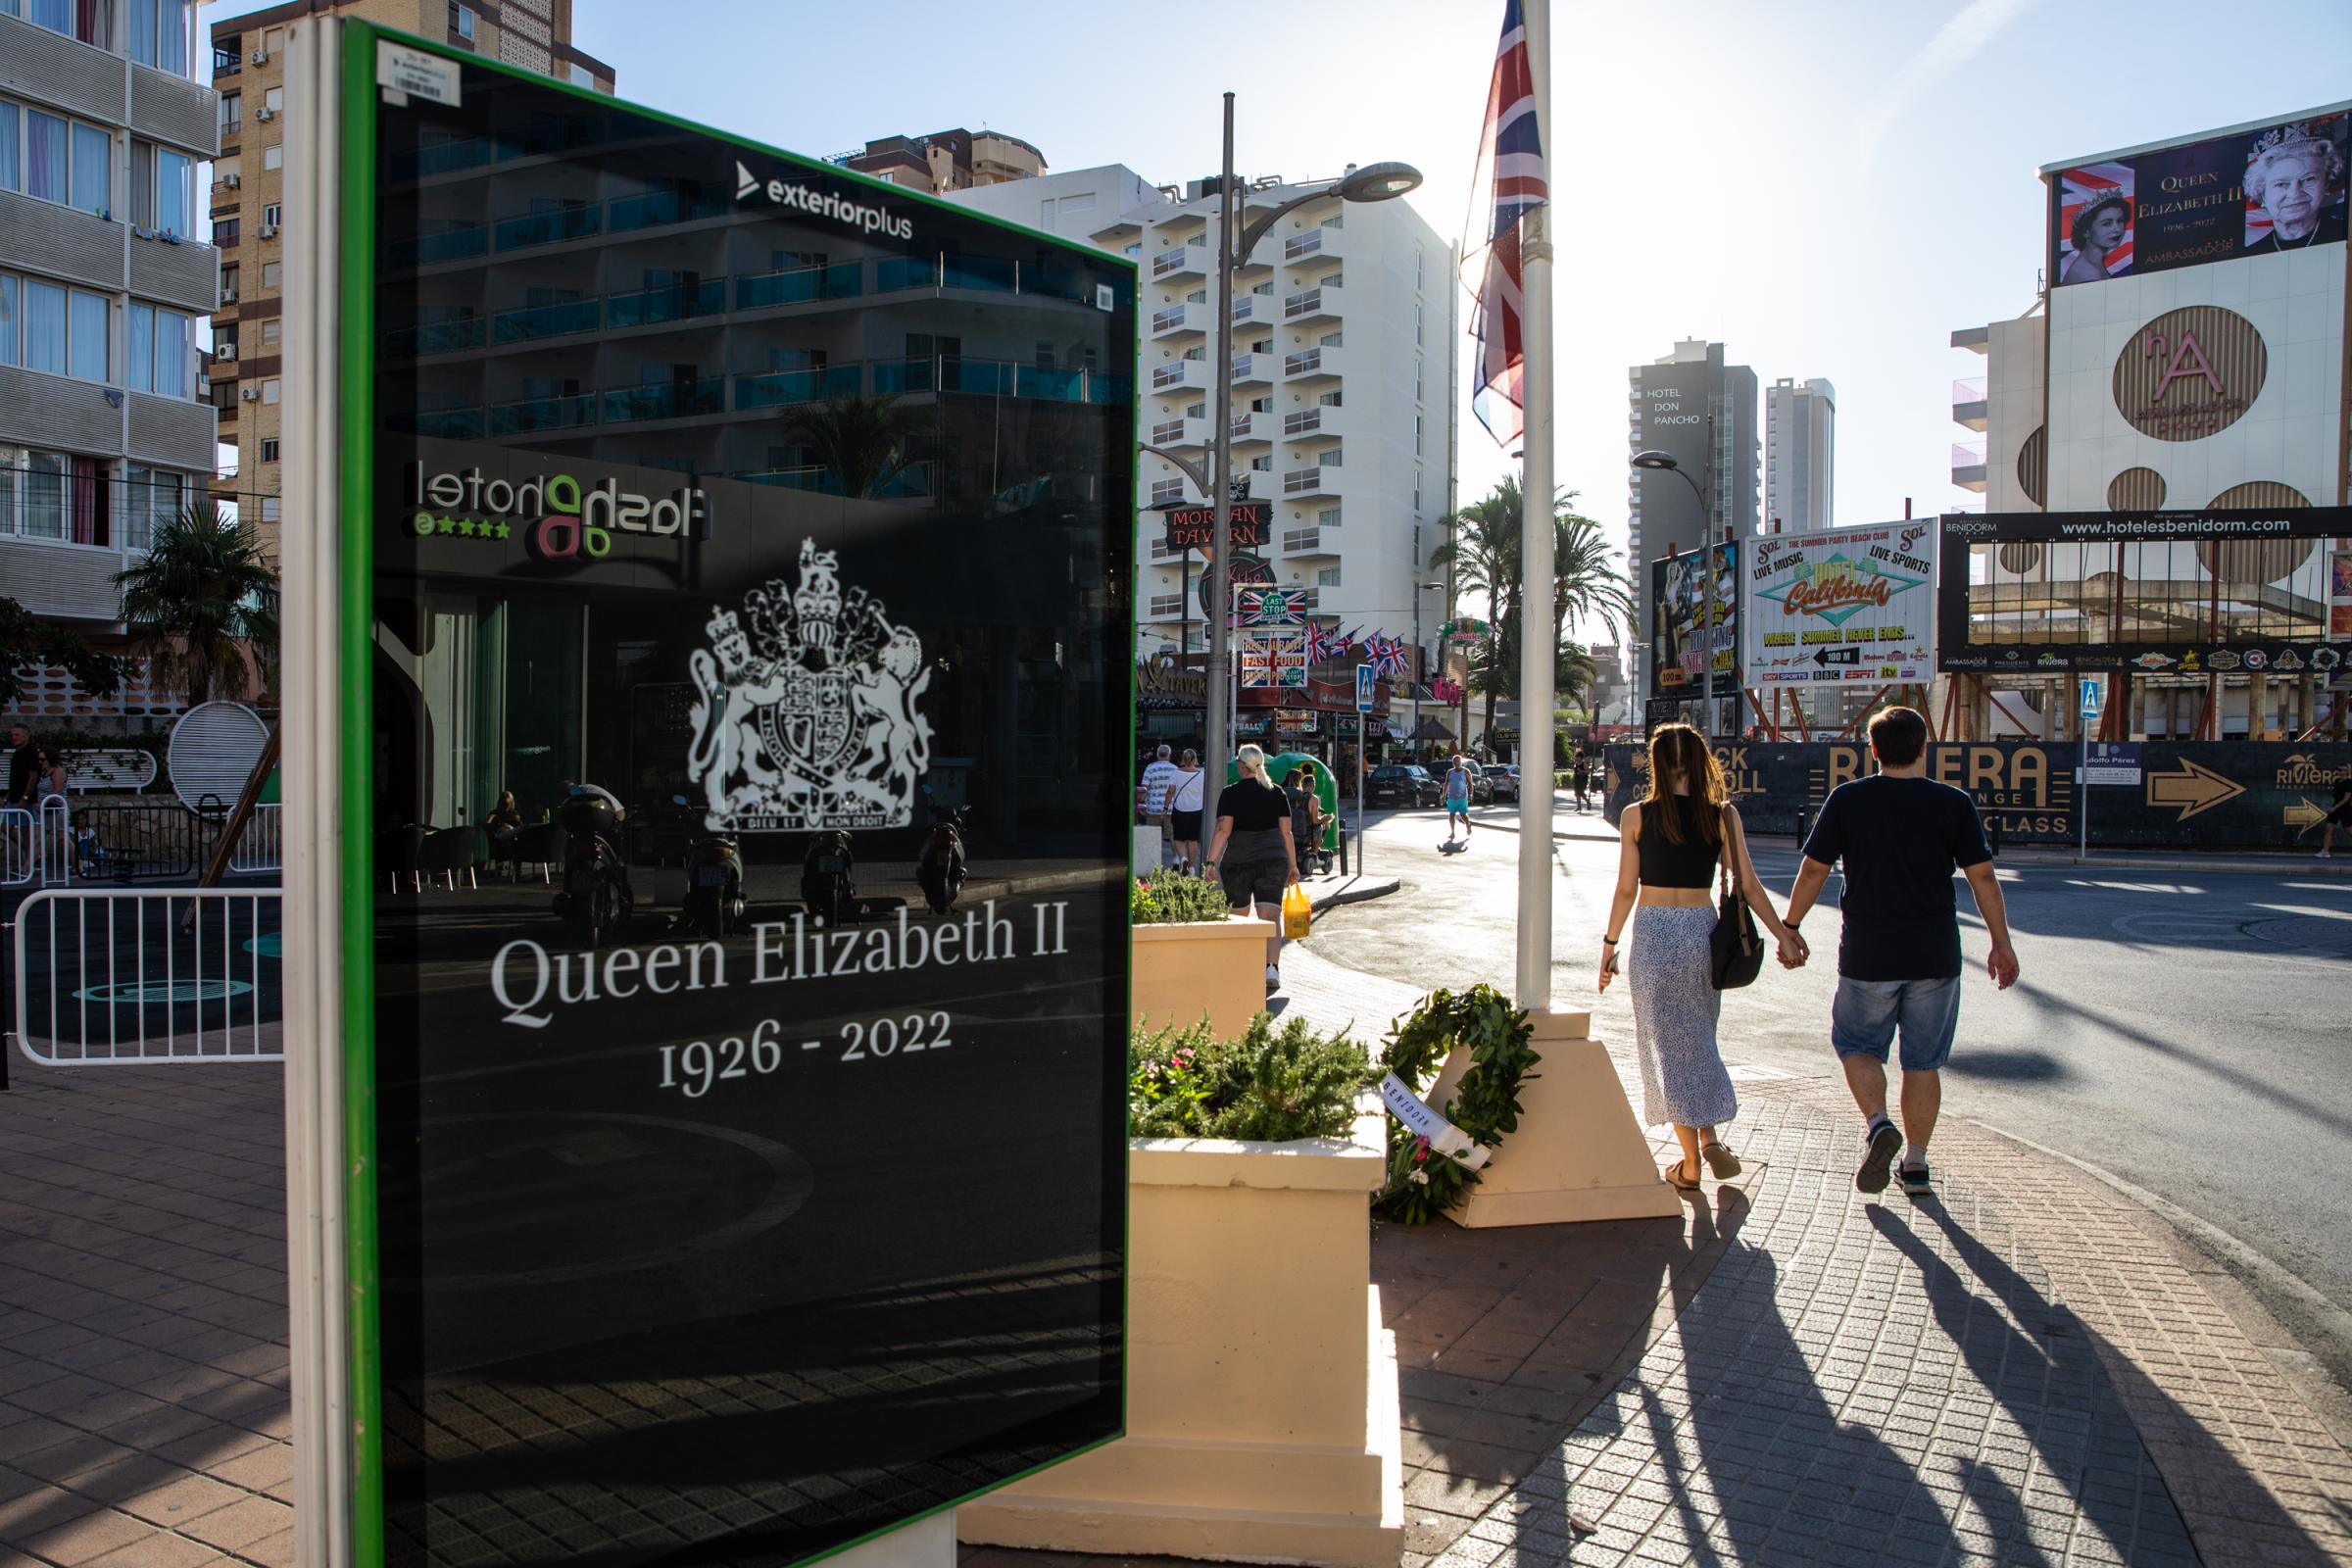 British Tourists In Benidorm Pay Tribute To Queen Elizabeth II - BENIDORM, SPAIN - SEPTEMBER 9: The City Council has...